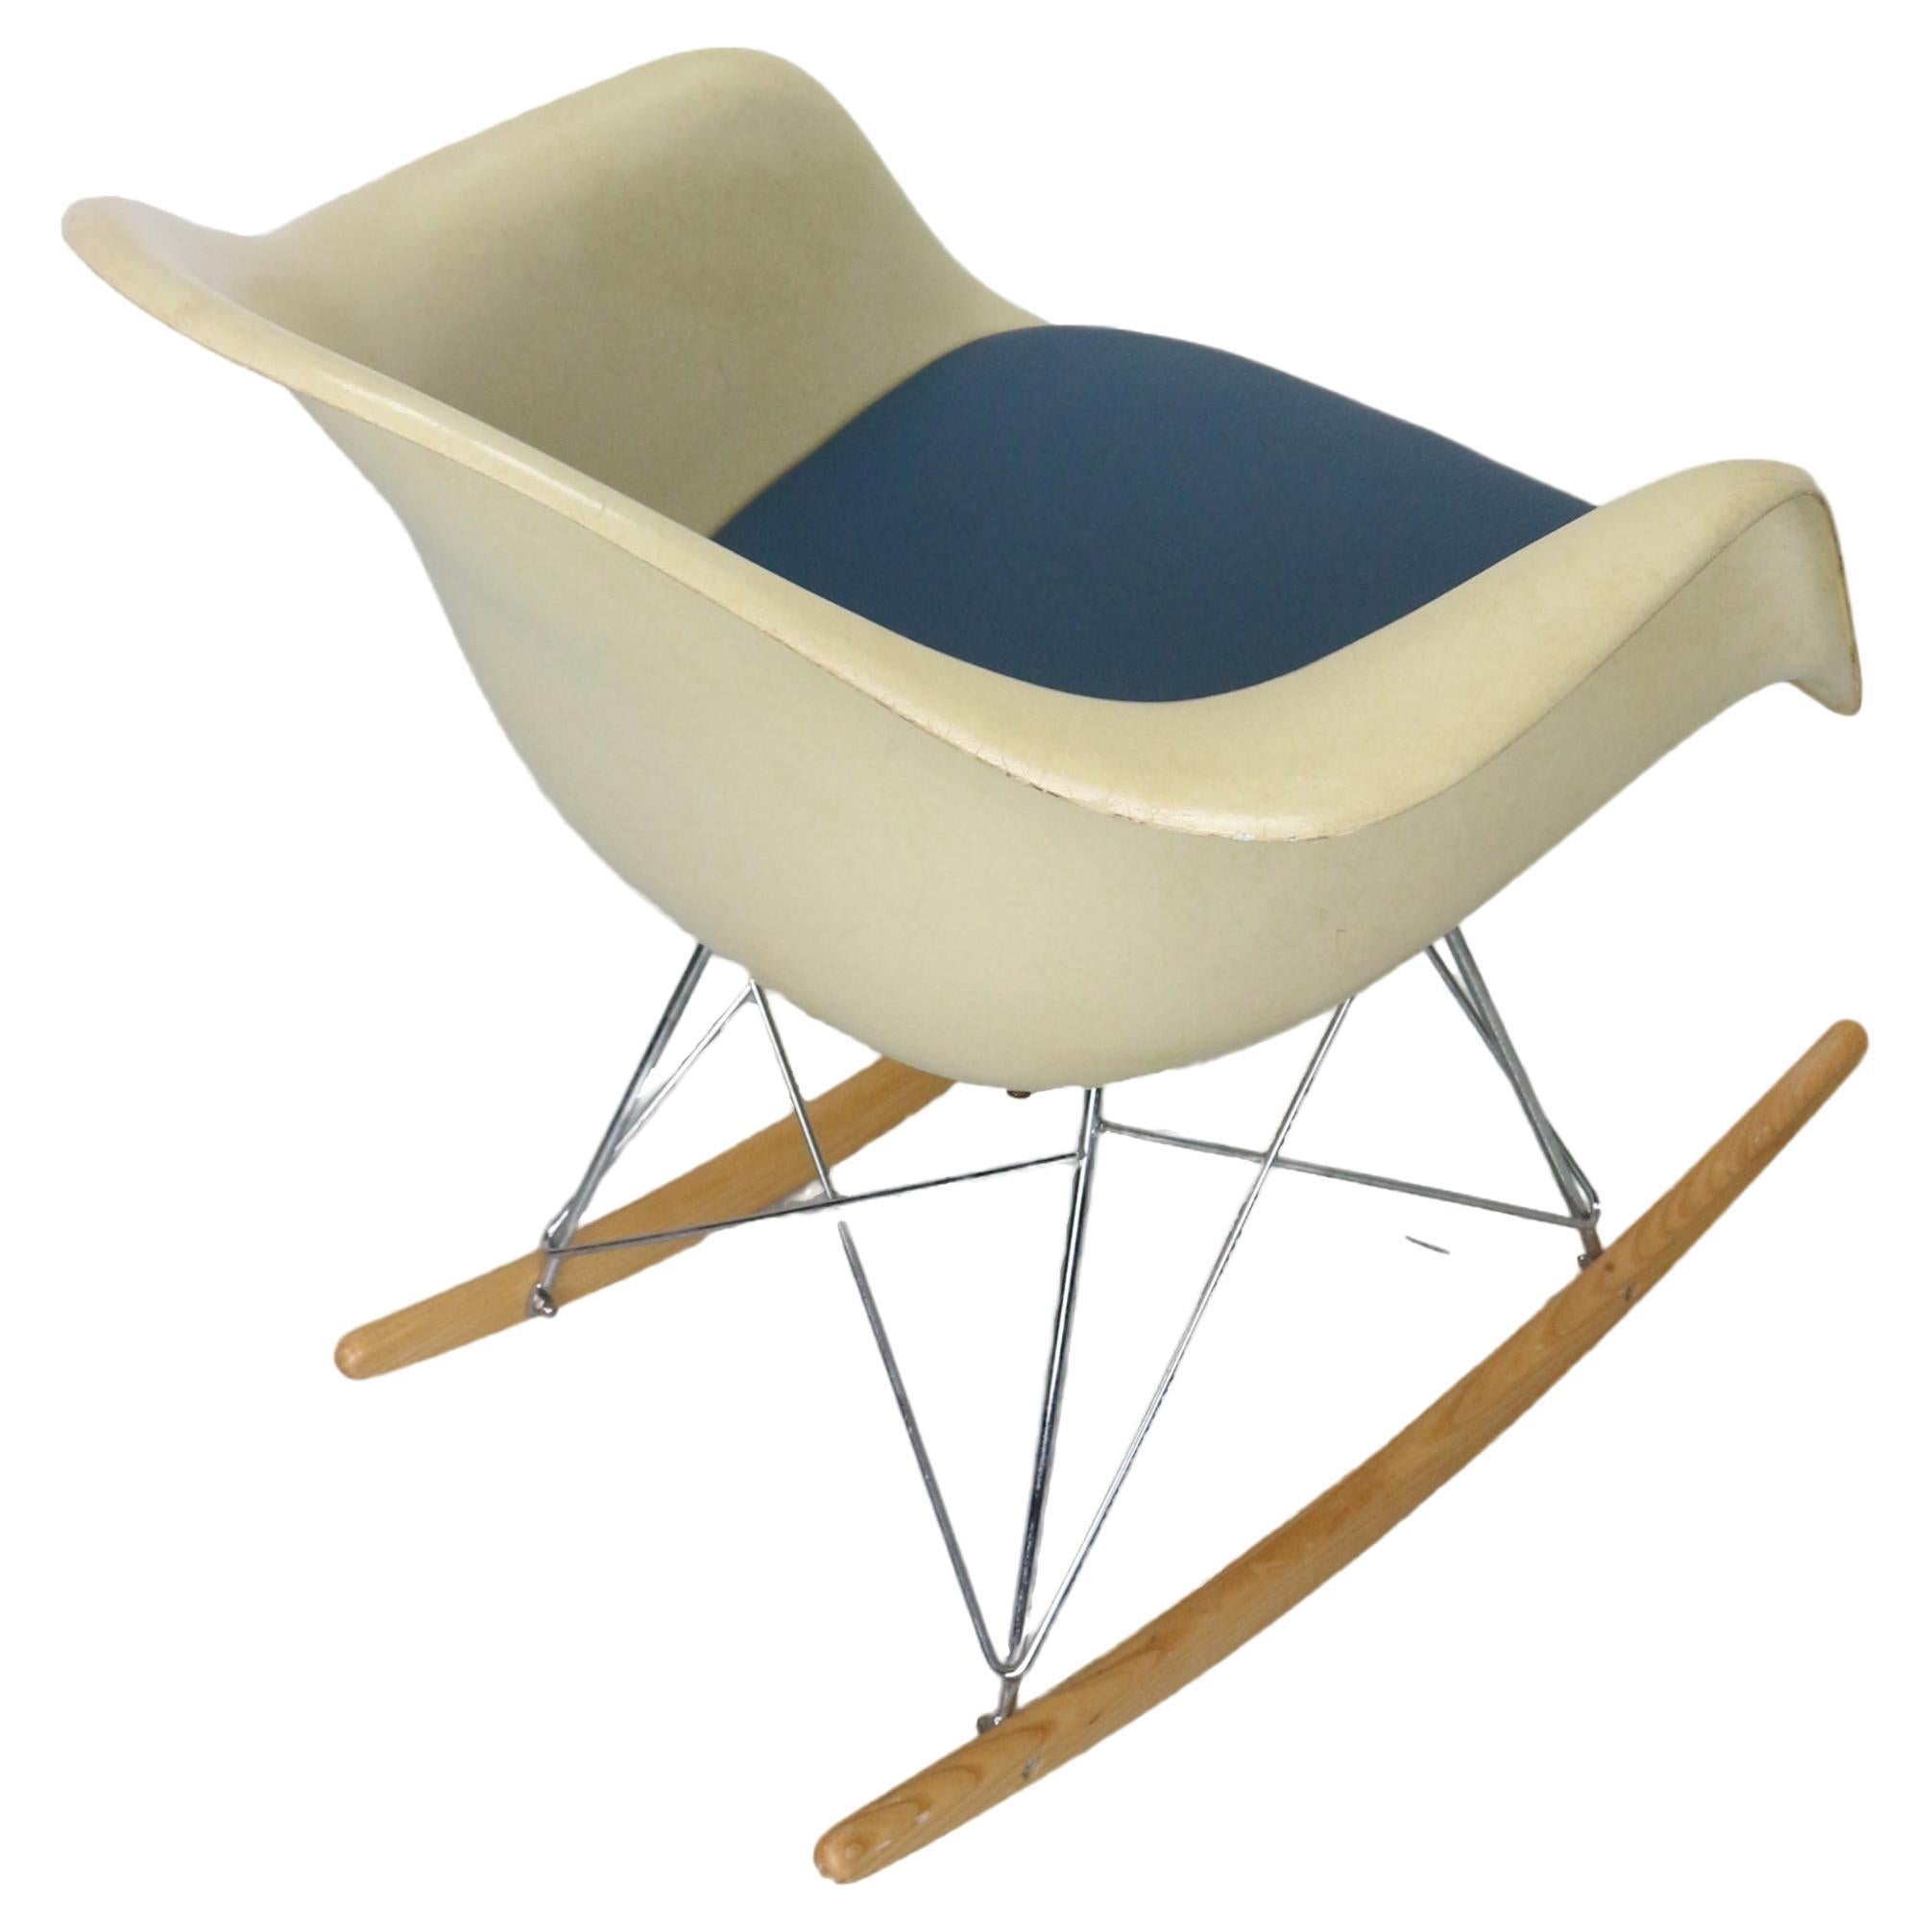 Herman Miller parchment shell fiberglass RAR rocker by Eames

Manufactured in the 1960s-1970s this rocker is one of the most iconic designs from Charles and Ray Eames.

RAR rocking chair by Charles and Ray Eames and manufactured by Herman Miller.